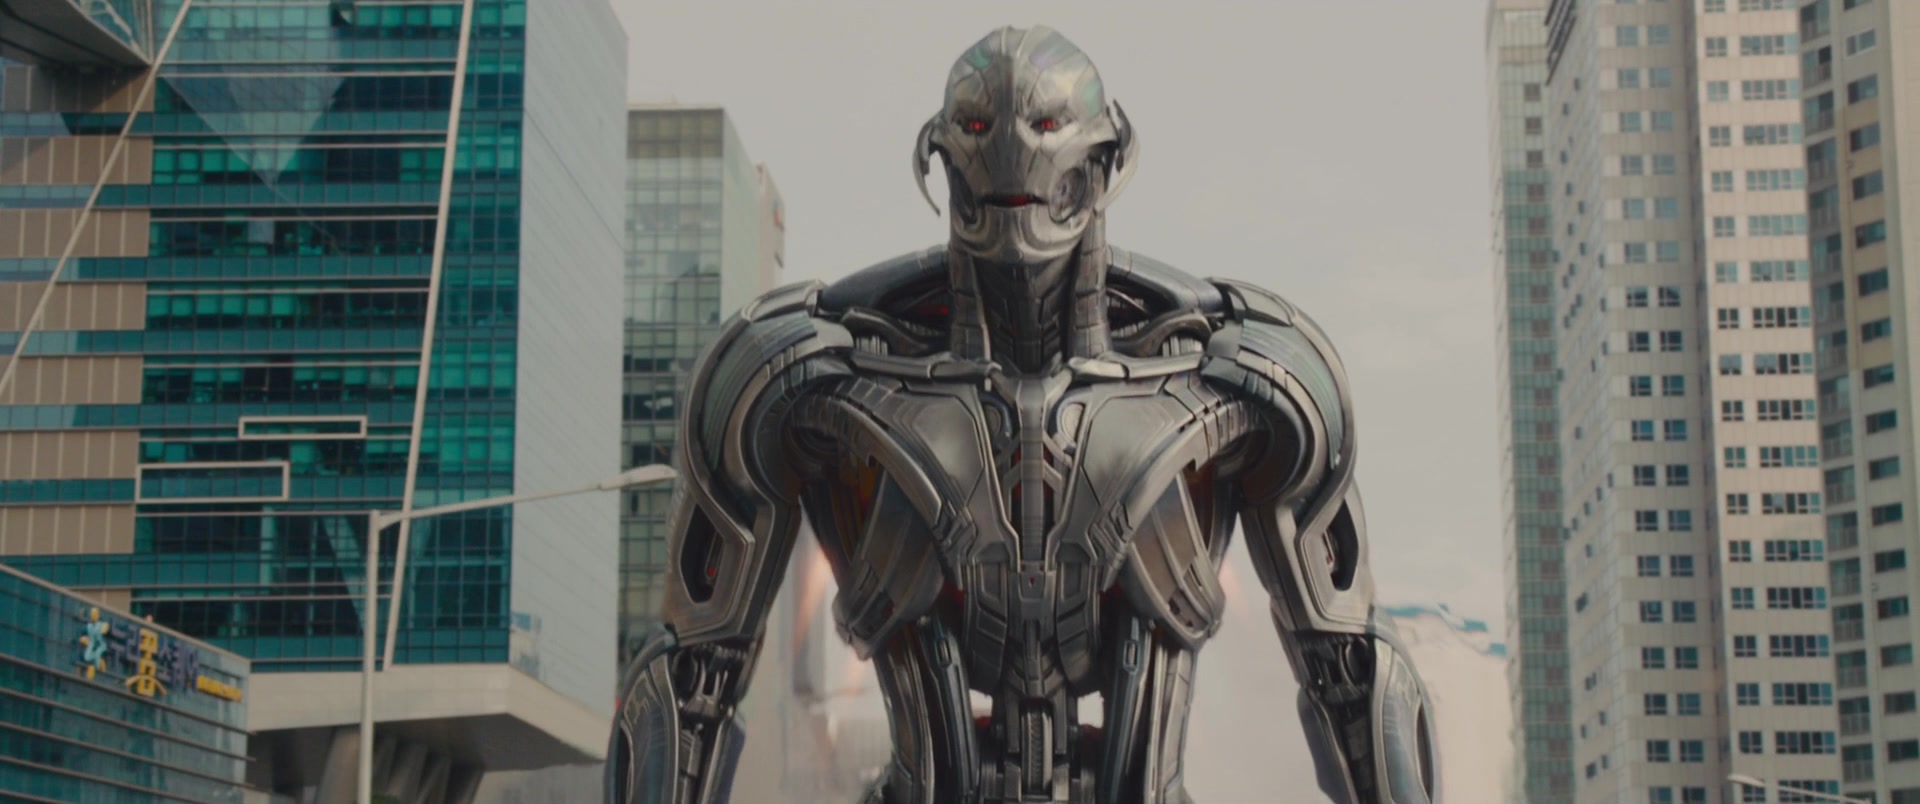 Ultron (James Spader) chases his potential body through the streets of Seoul in Avengers: Age of Ultron (2015), Marvel Entertainment